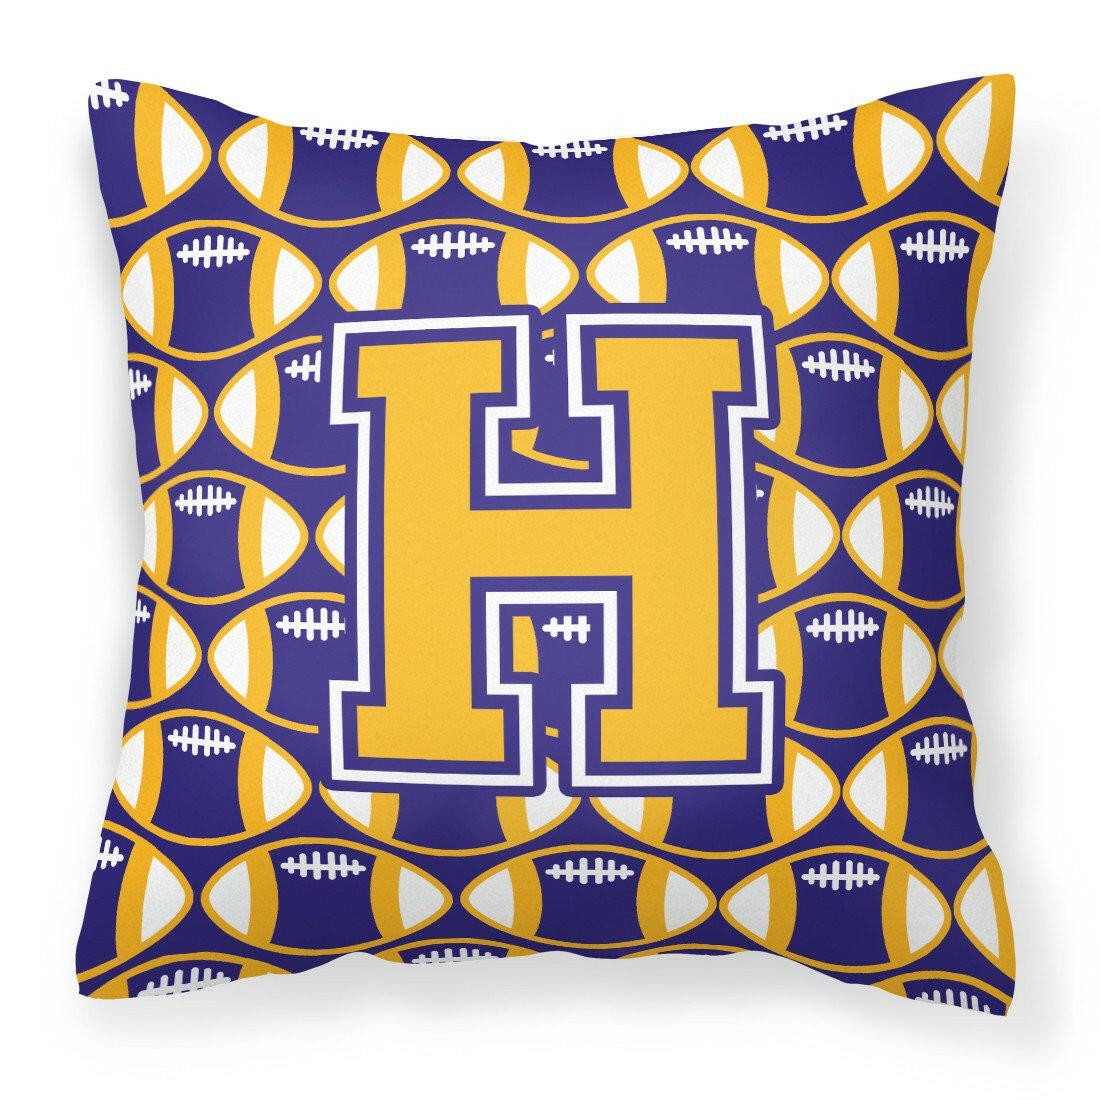 Letter H Football Purple and Gold Fabric Decorative Pillow CJ1064-HPW1414 by Caroline's Treasures